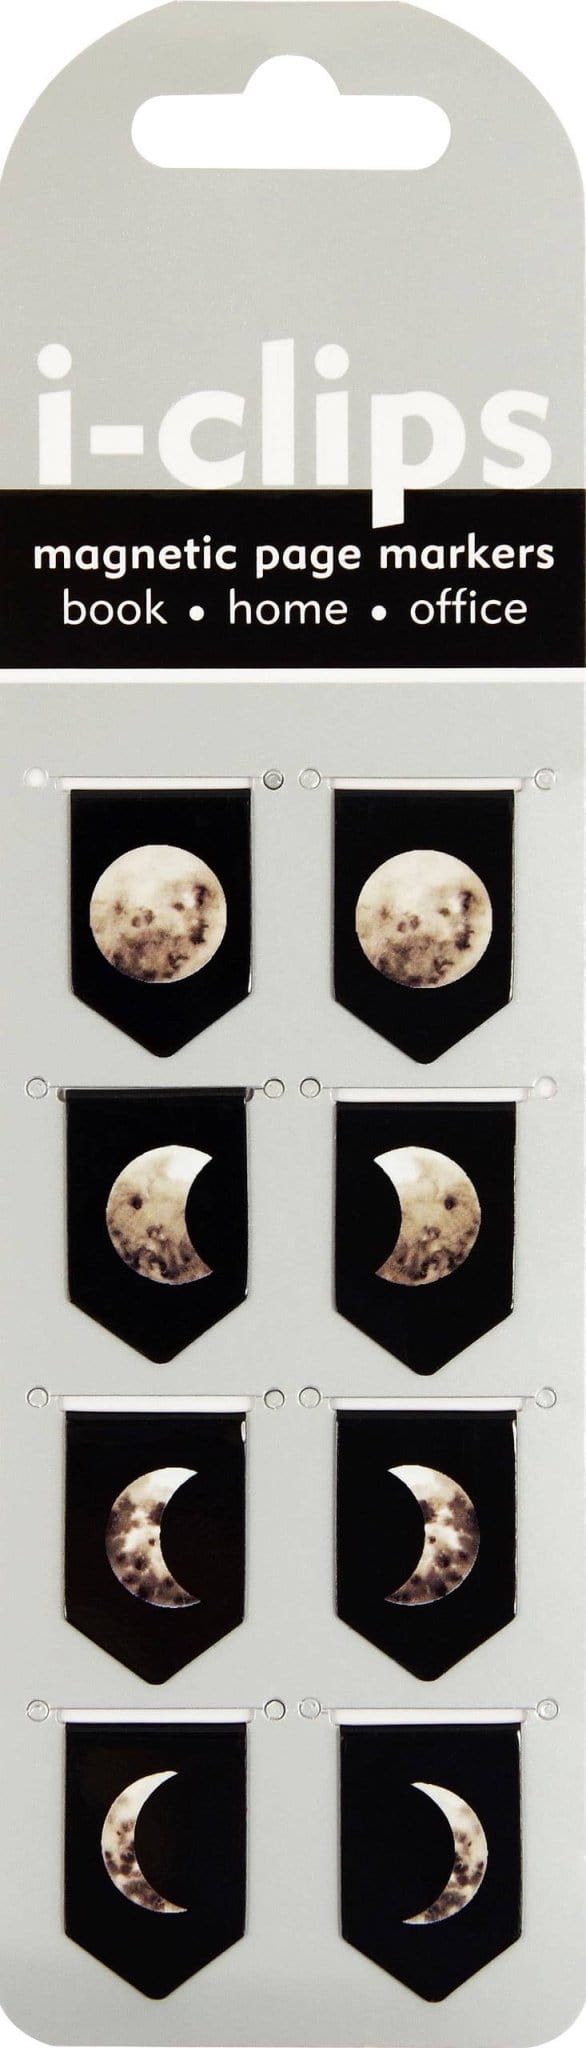 Bookmarks Moon Phases i-Clips Magnetic Page Markers 9781441326140